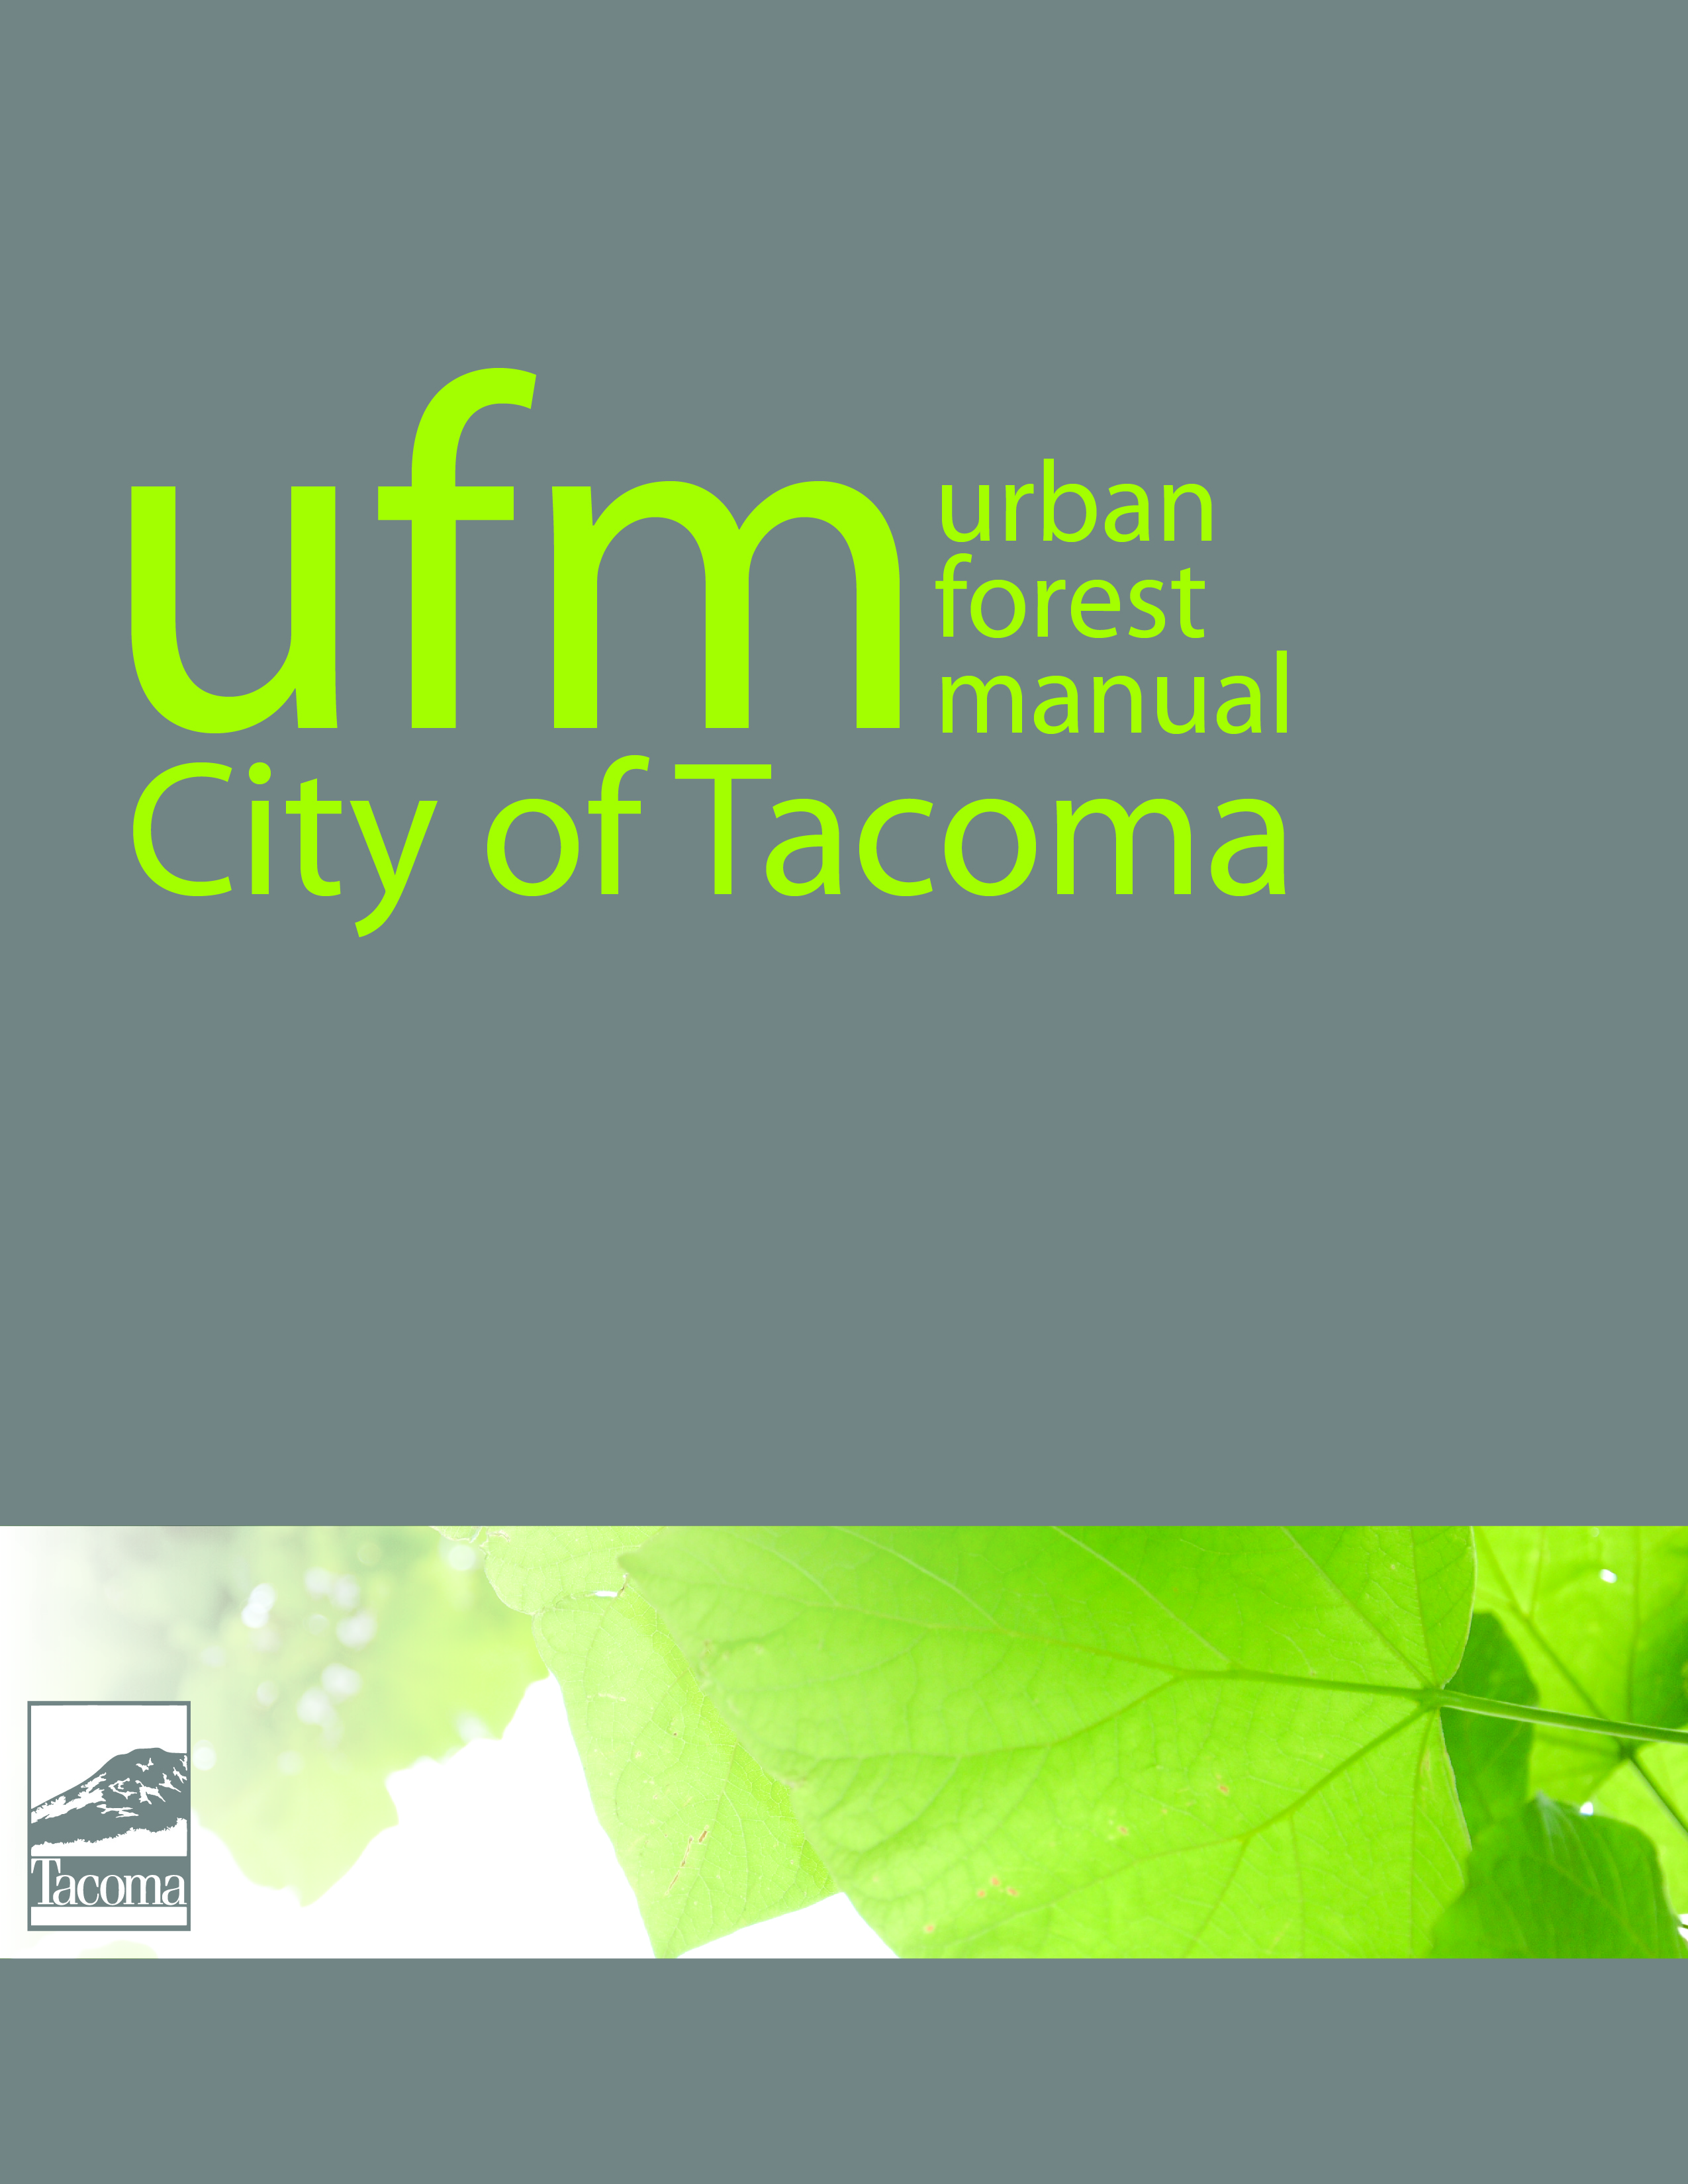 Image of Urban Forest Manual front cover